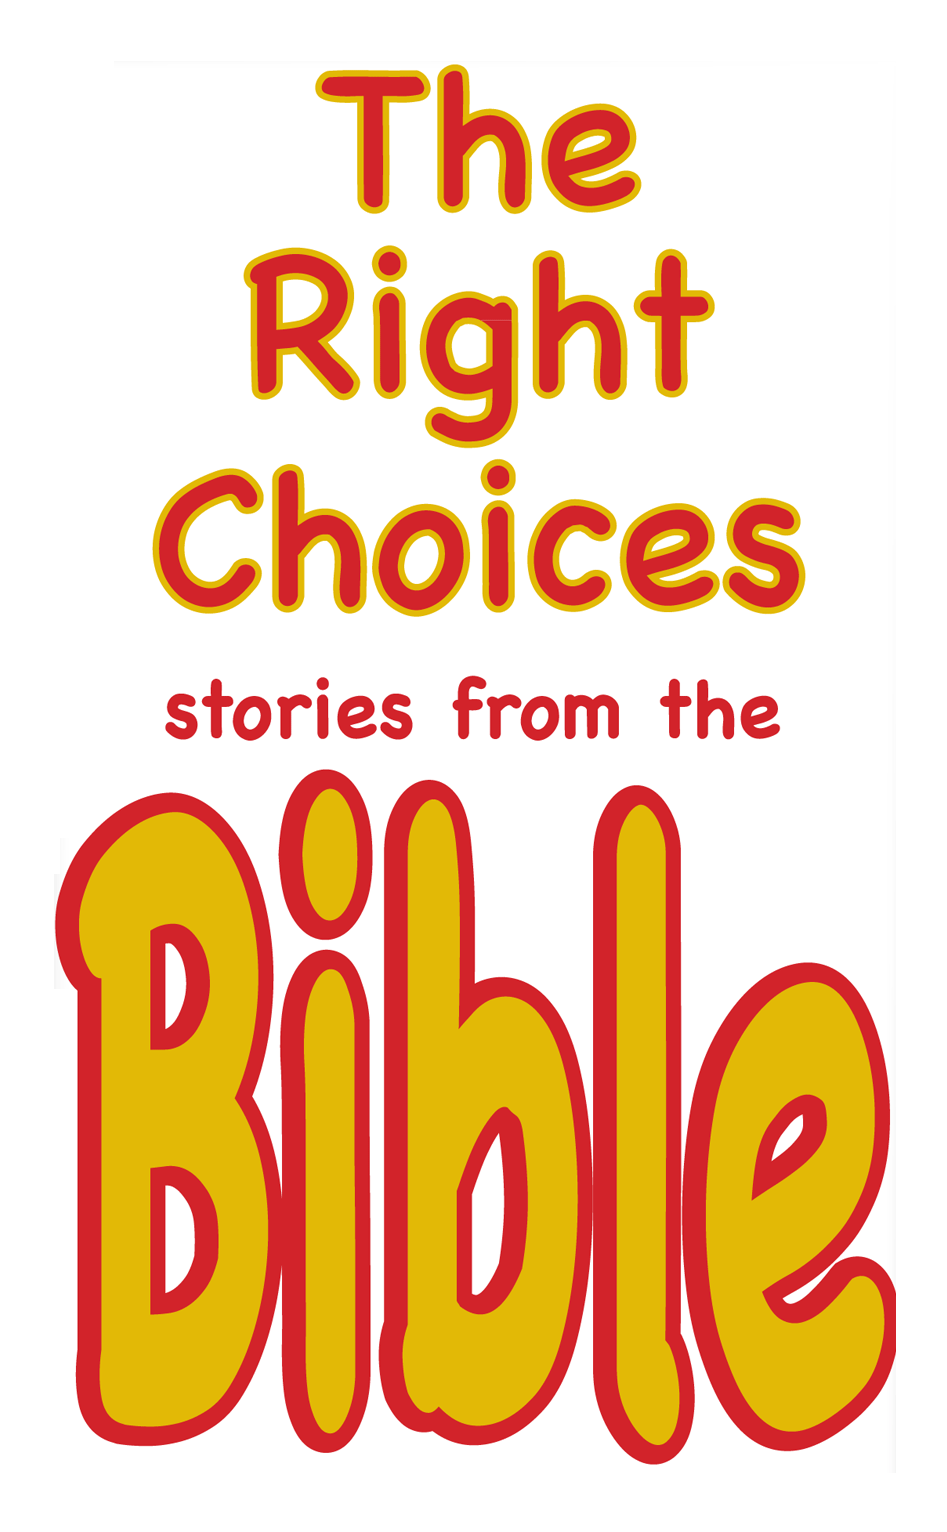 The Right Choices Bible title